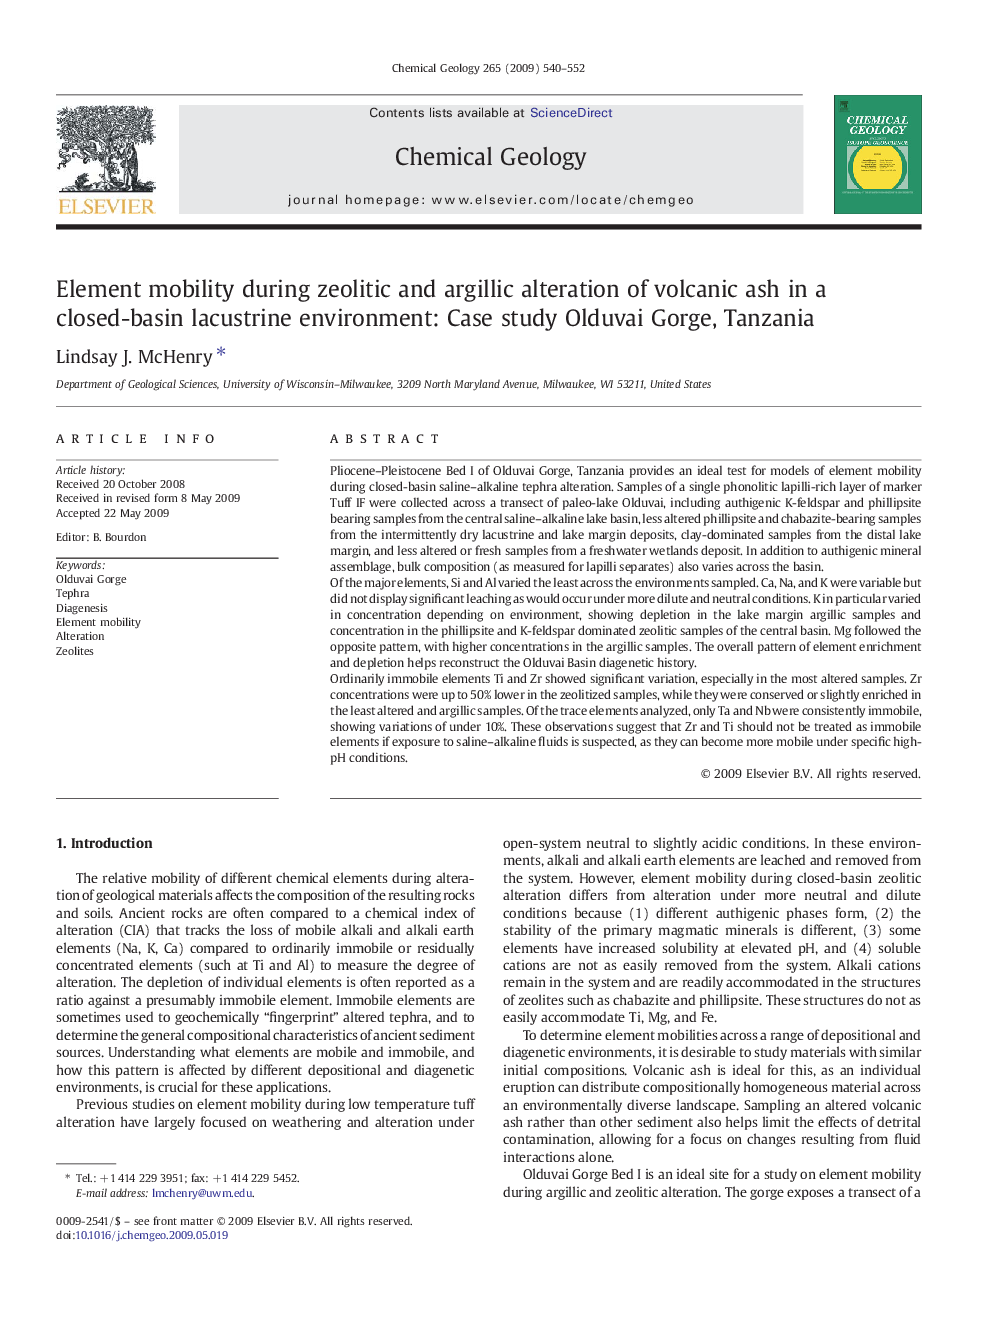 Element mobility during zeolitic and argillic alteration of volcanic ash in a closed-basin lacustrine environment: Case study Olduvai Gorge, Tanzania